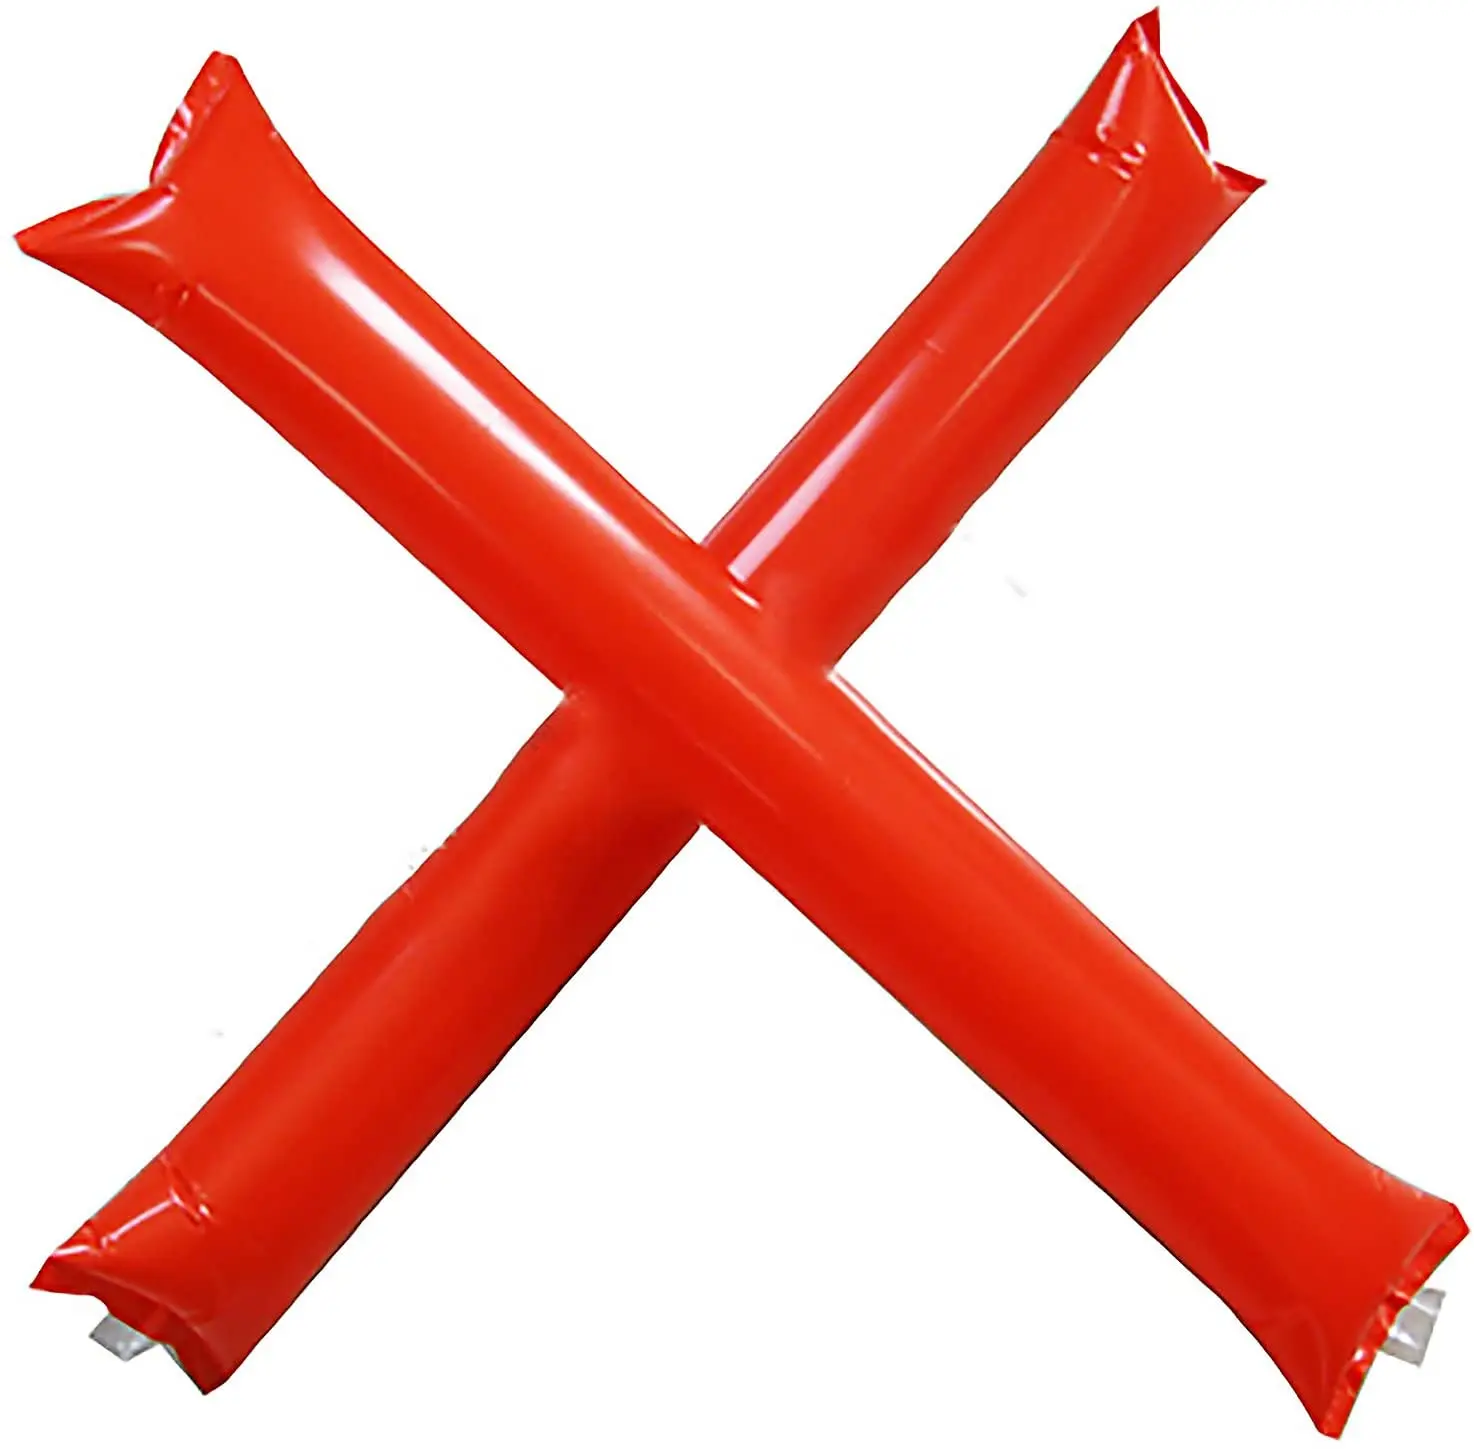 

1 Pair Red Colour Cheering Sticks Bang Bambam Thunder Noise Makers Clappers Cheerleading For Football Ball Sports Party Novelty